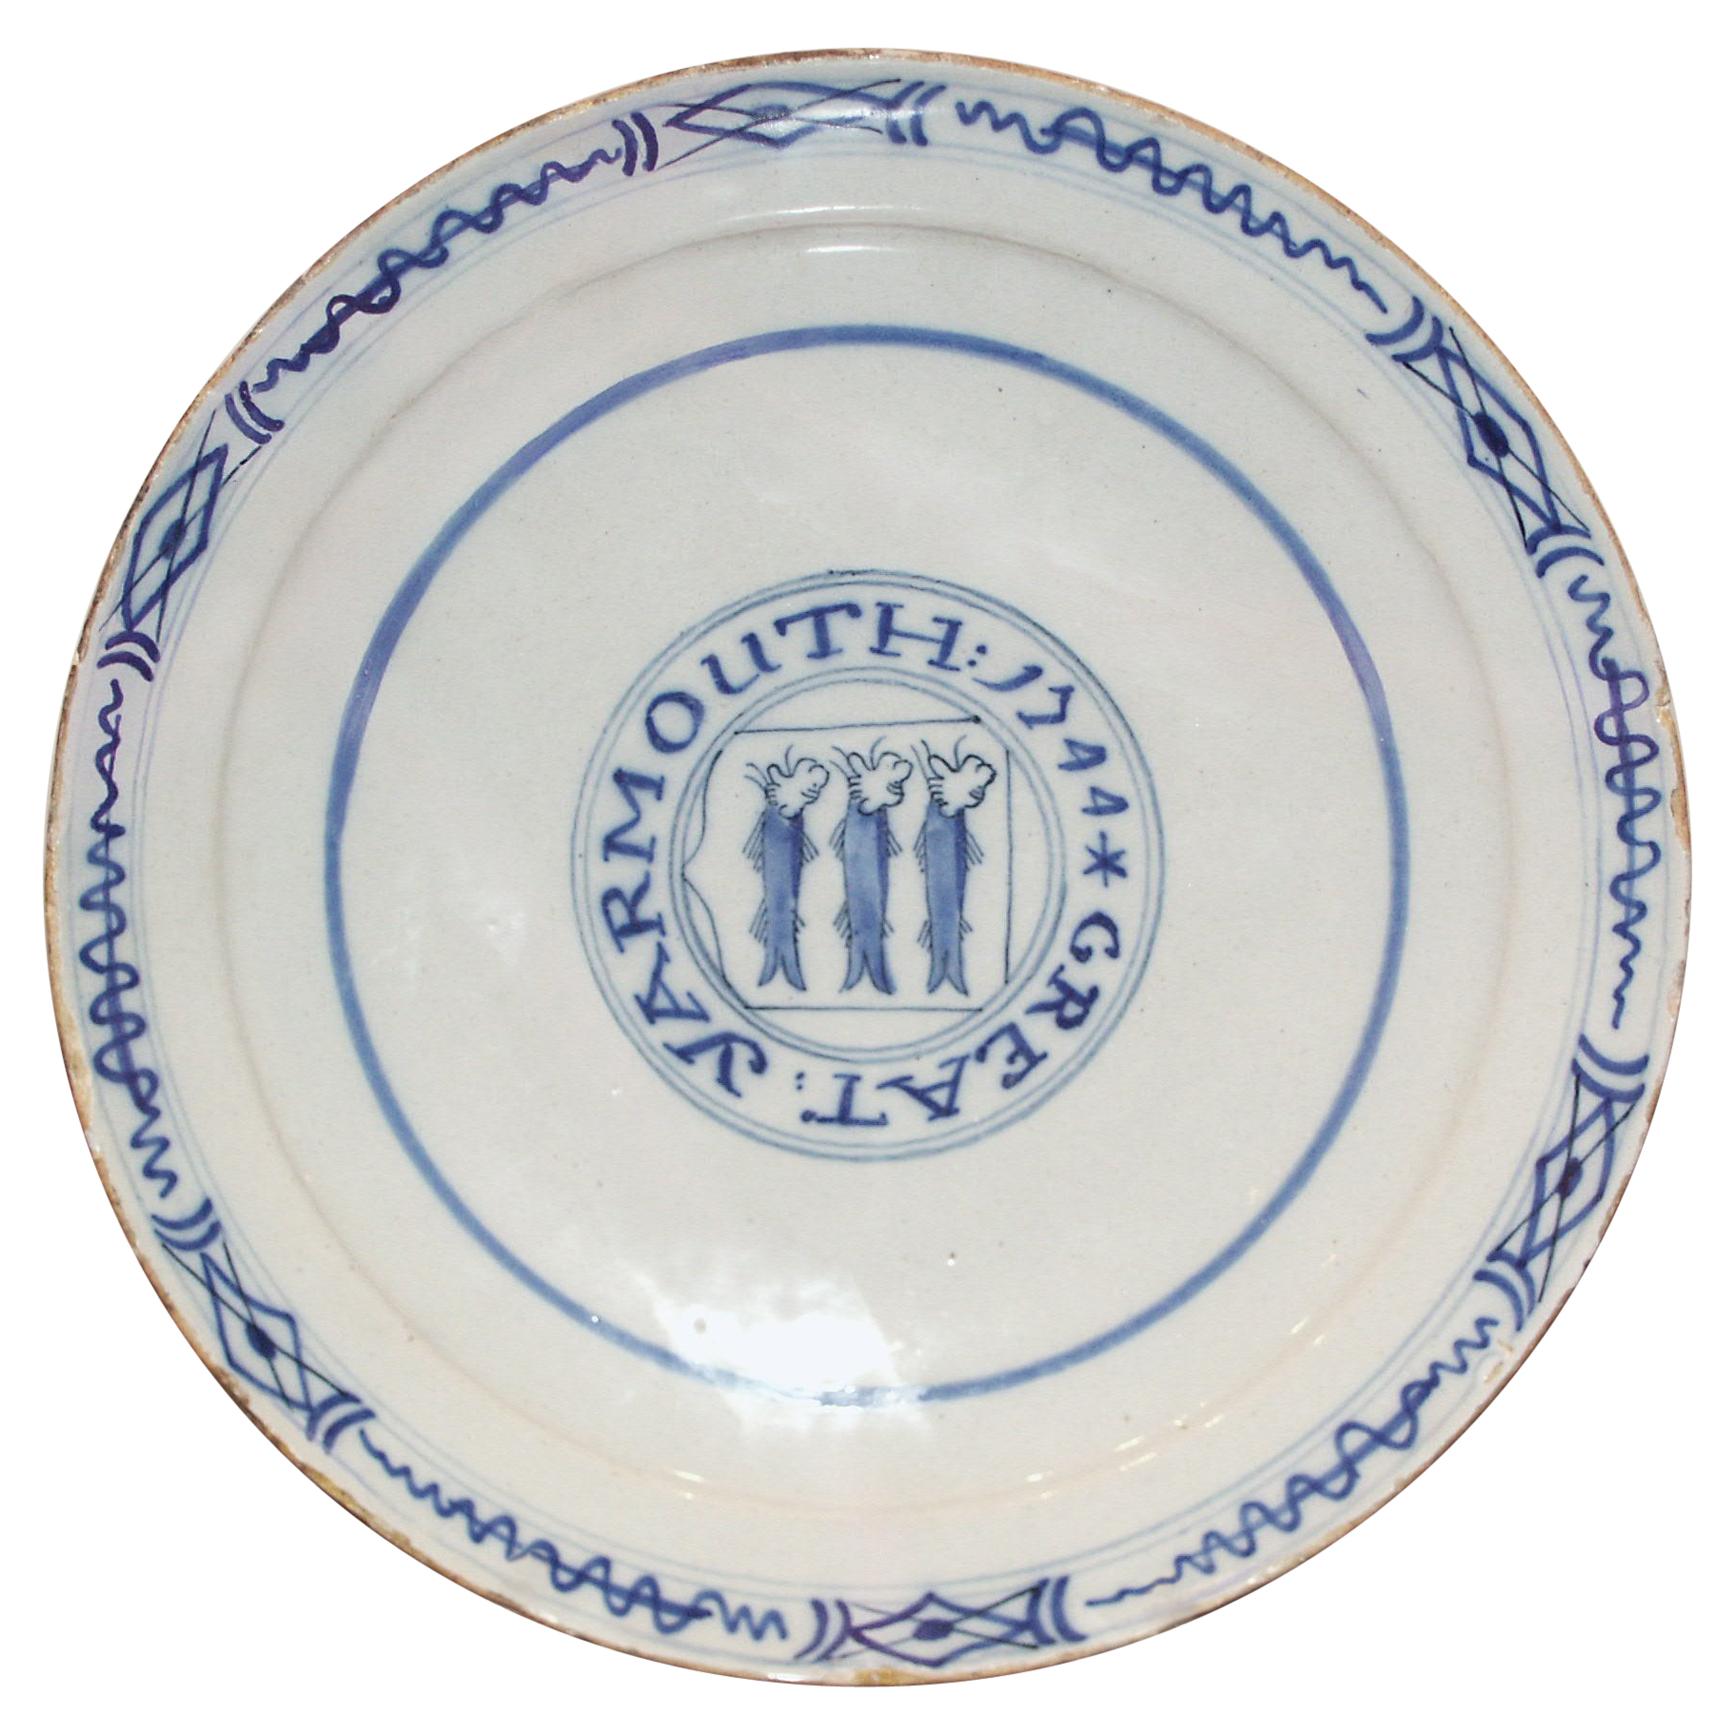 Plate Delftware, Inscribed 1744, Dutch, Great Yarmouth, Blue and White, Herring